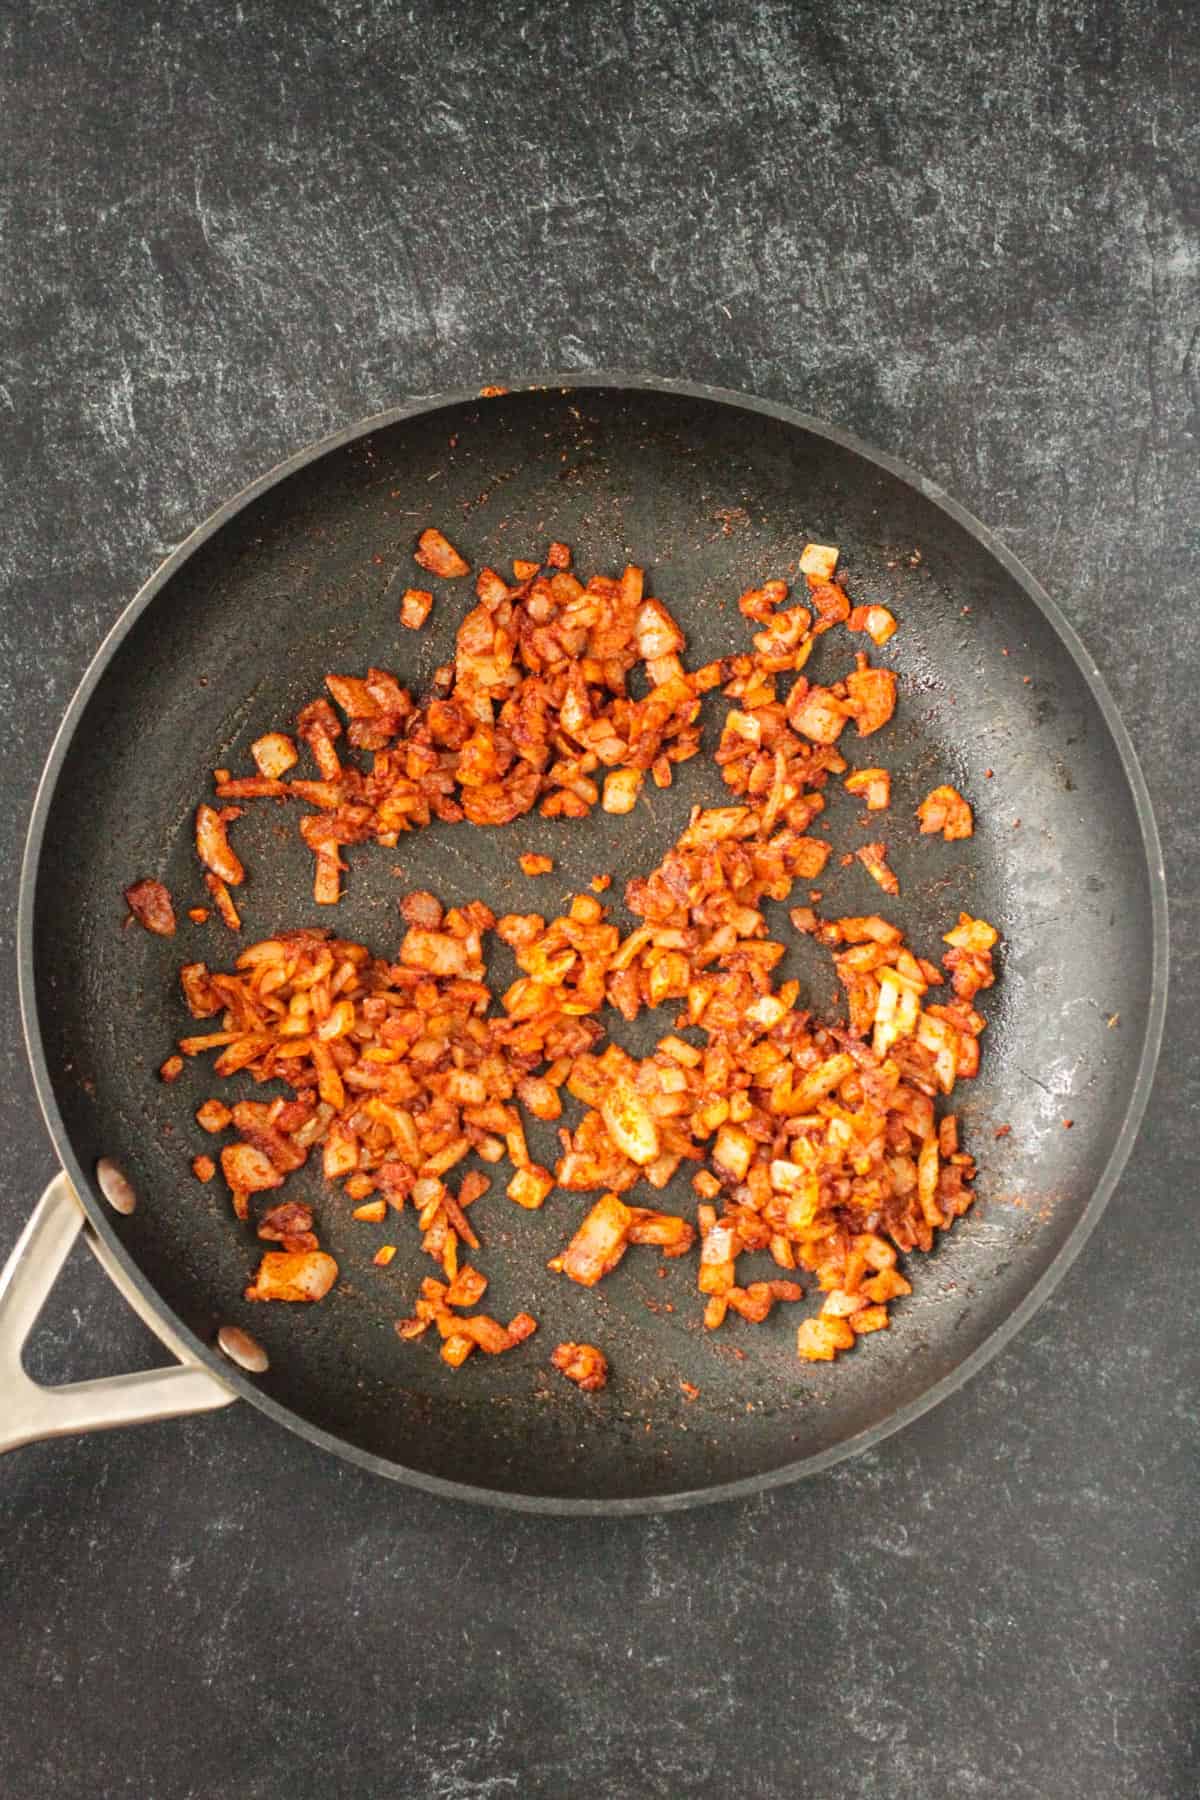 Onions sautéed with spices in a skillet.